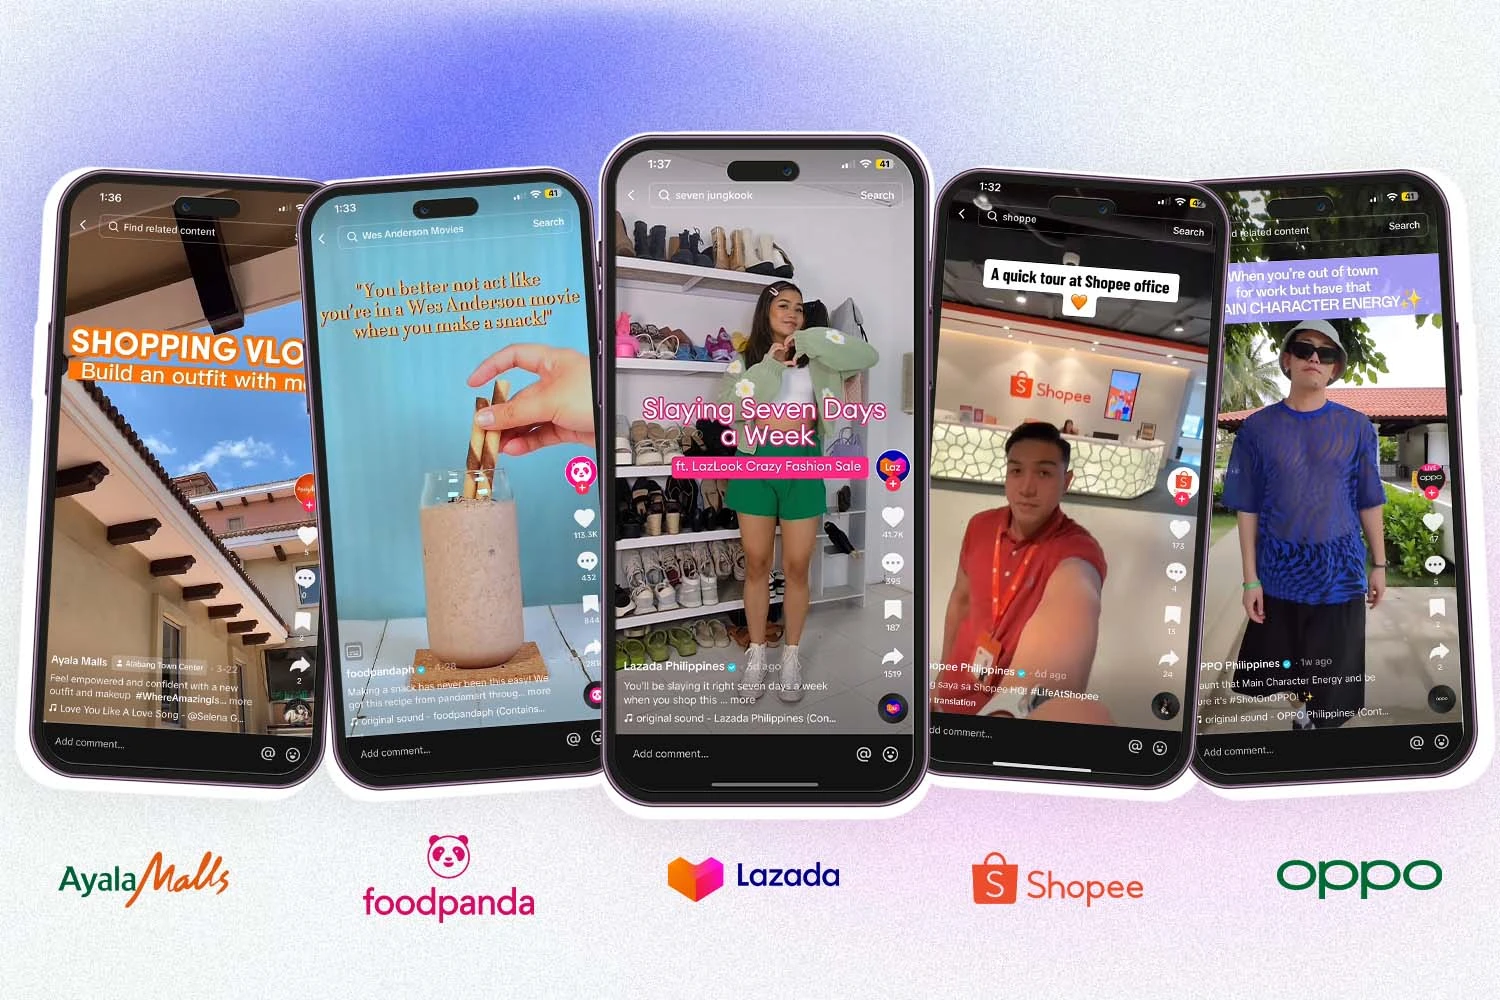 TikTok contents from Ayala malls, Food panda, Lazada, Shopee, and Oppo, the top brands dominating TikTok right now.